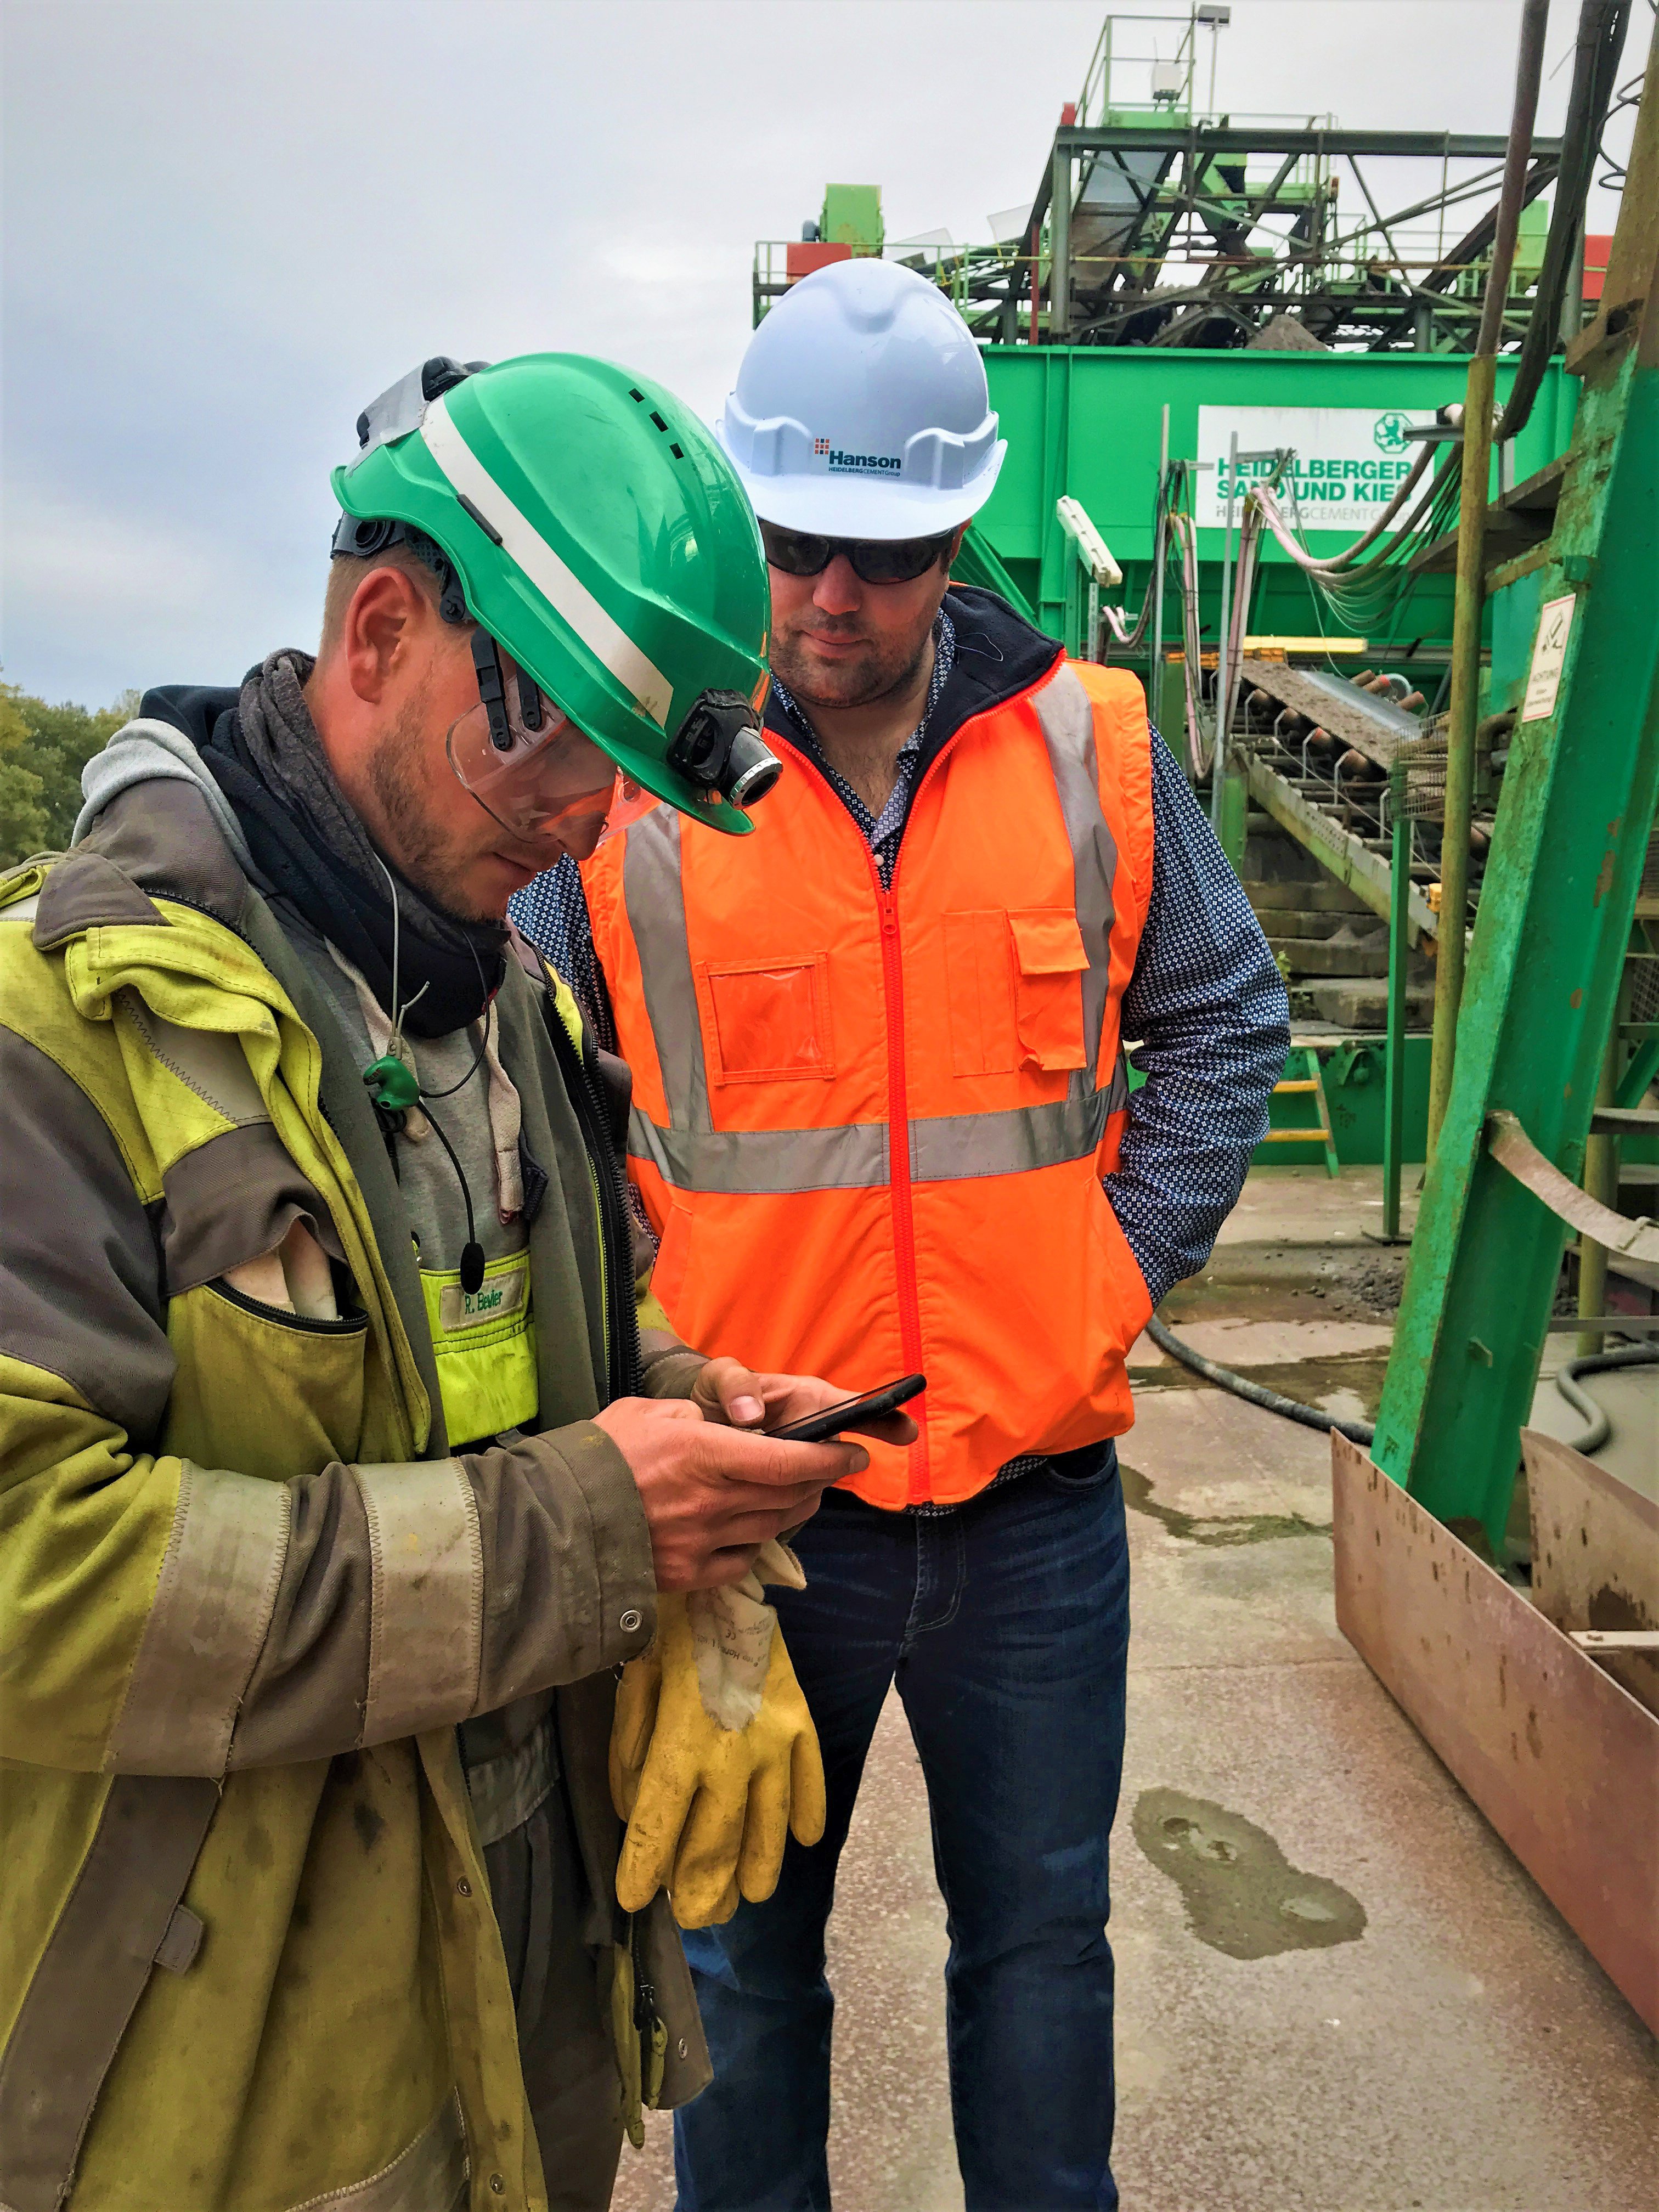 Two men in construction clothes are looking at a mobile phone